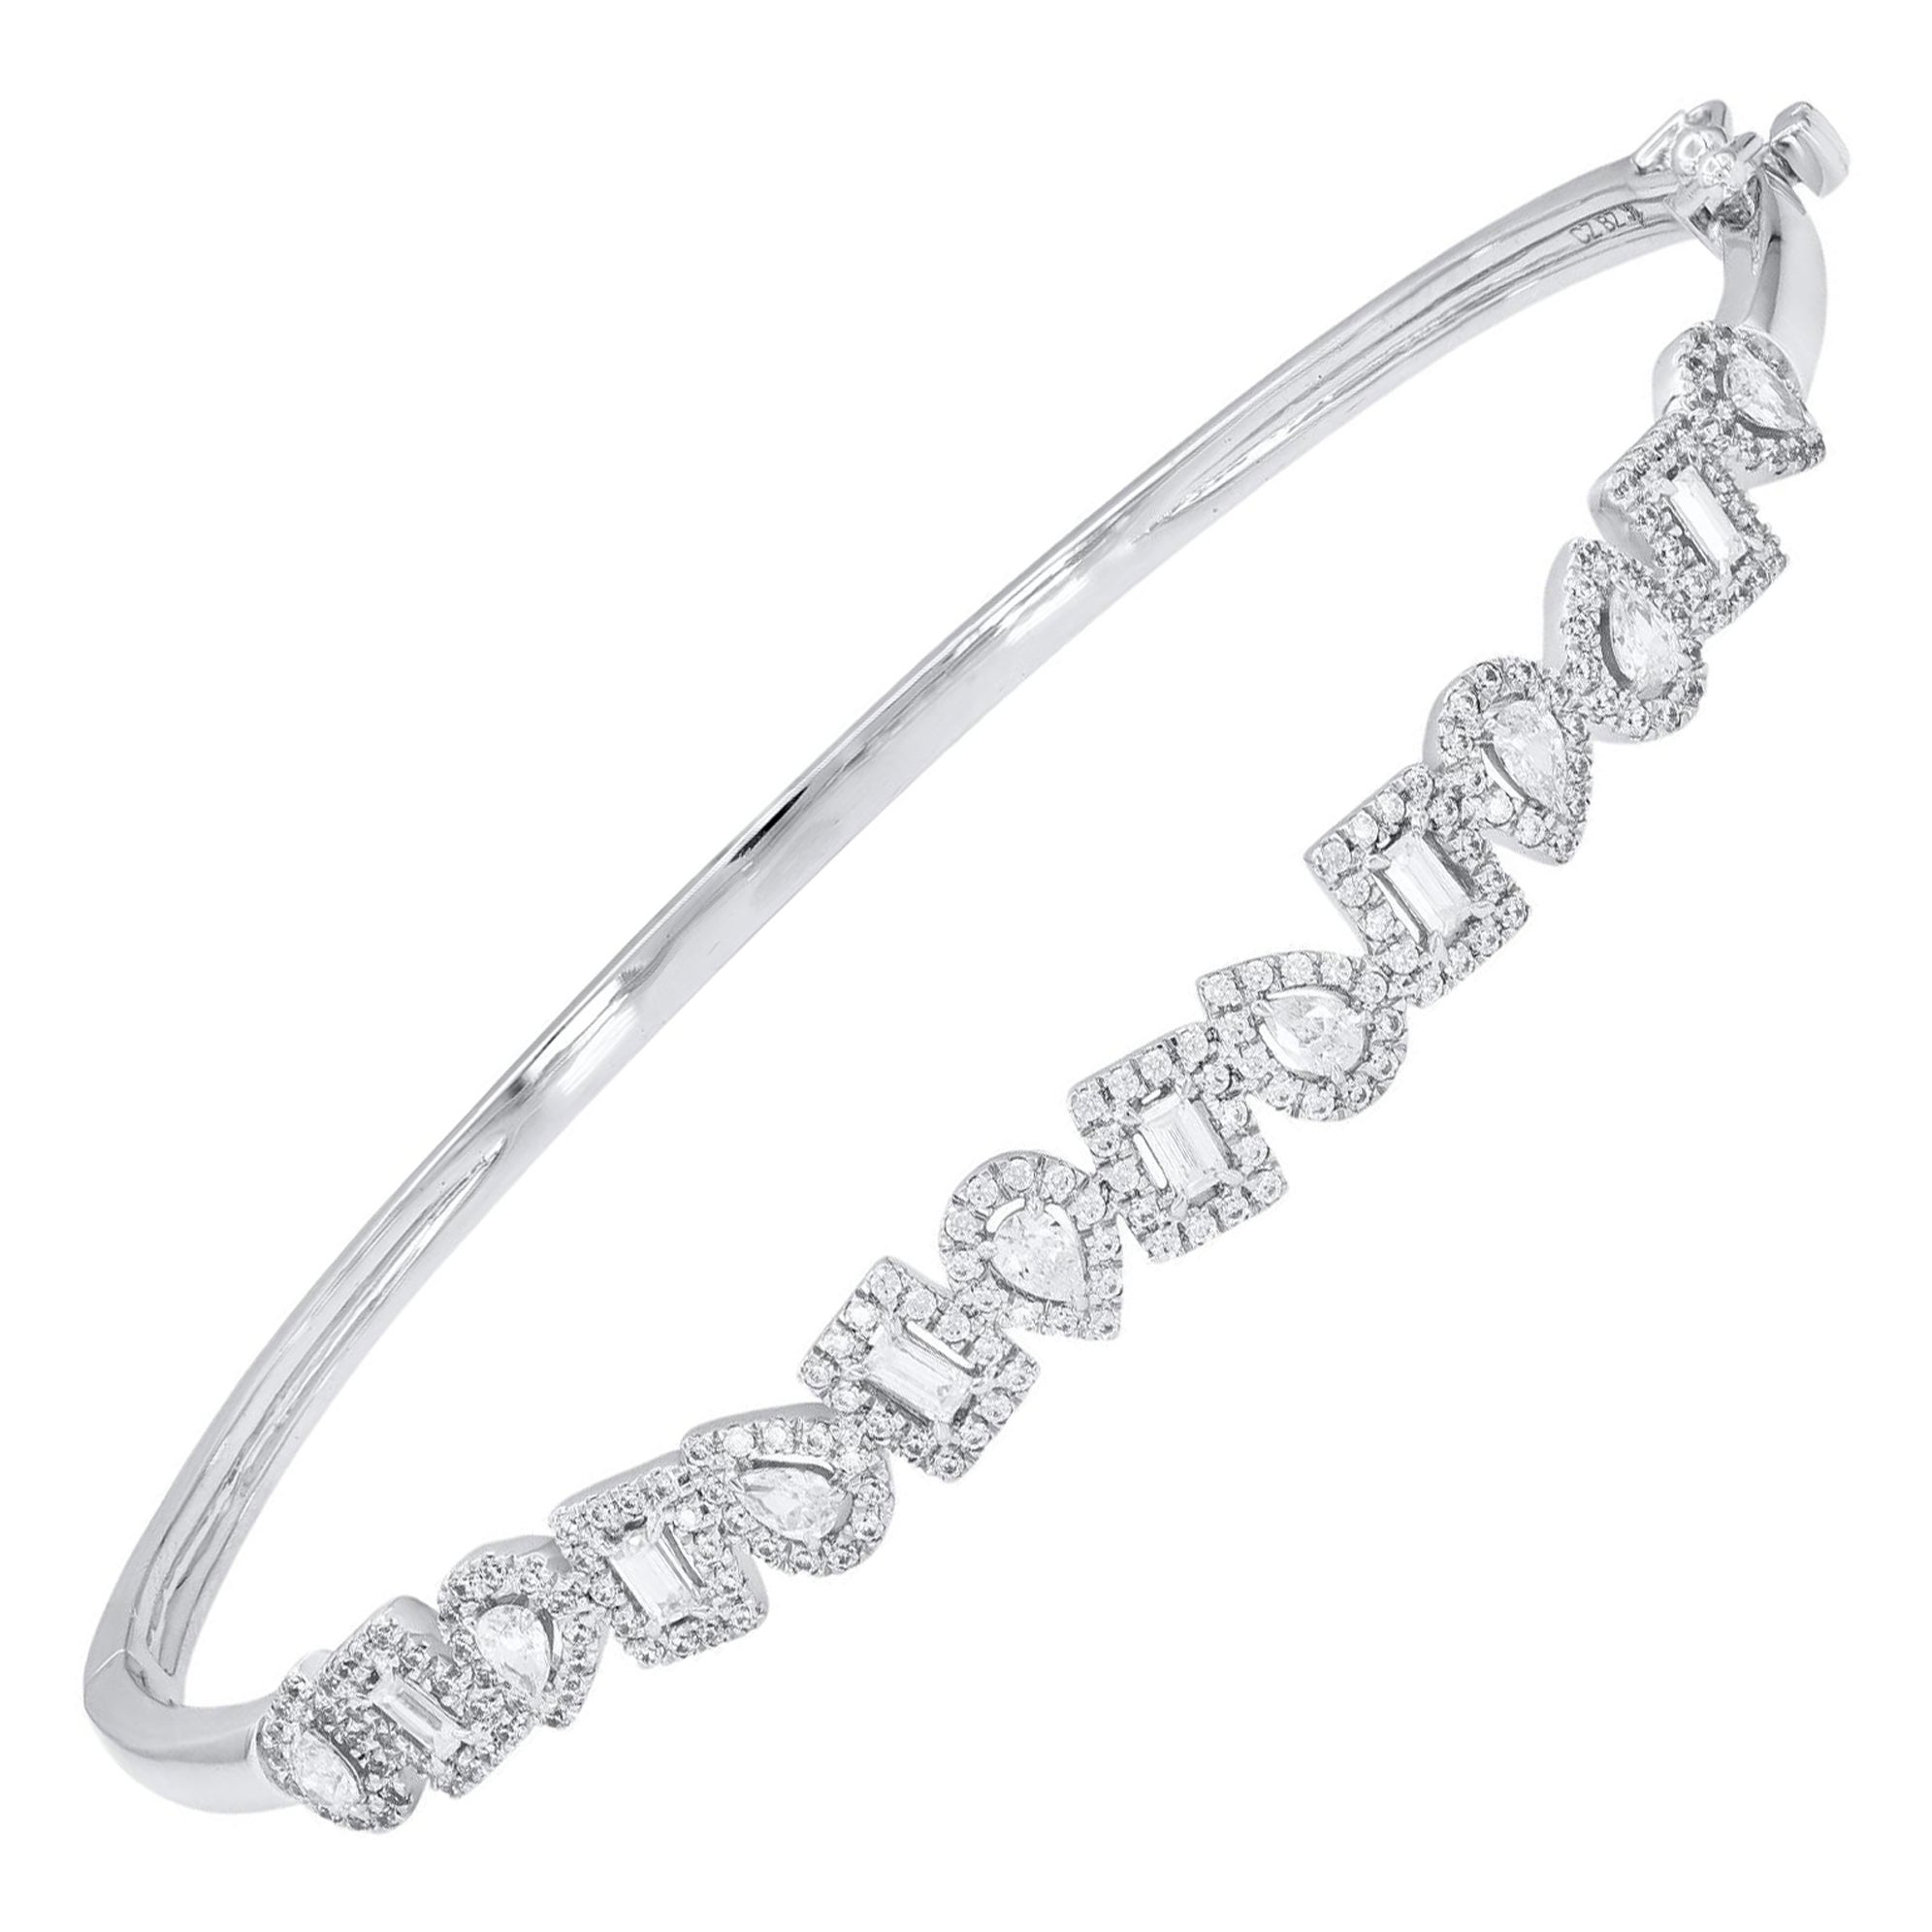 Classic and sophisticated, this diamond bangle bracelet pairs well with any attire.
This Shimmering bangle bracelet features 194 natural pear, baguette & single cut diamonds in prong setting and crafted in 14 kt white gold. Diamonds are graded H-I